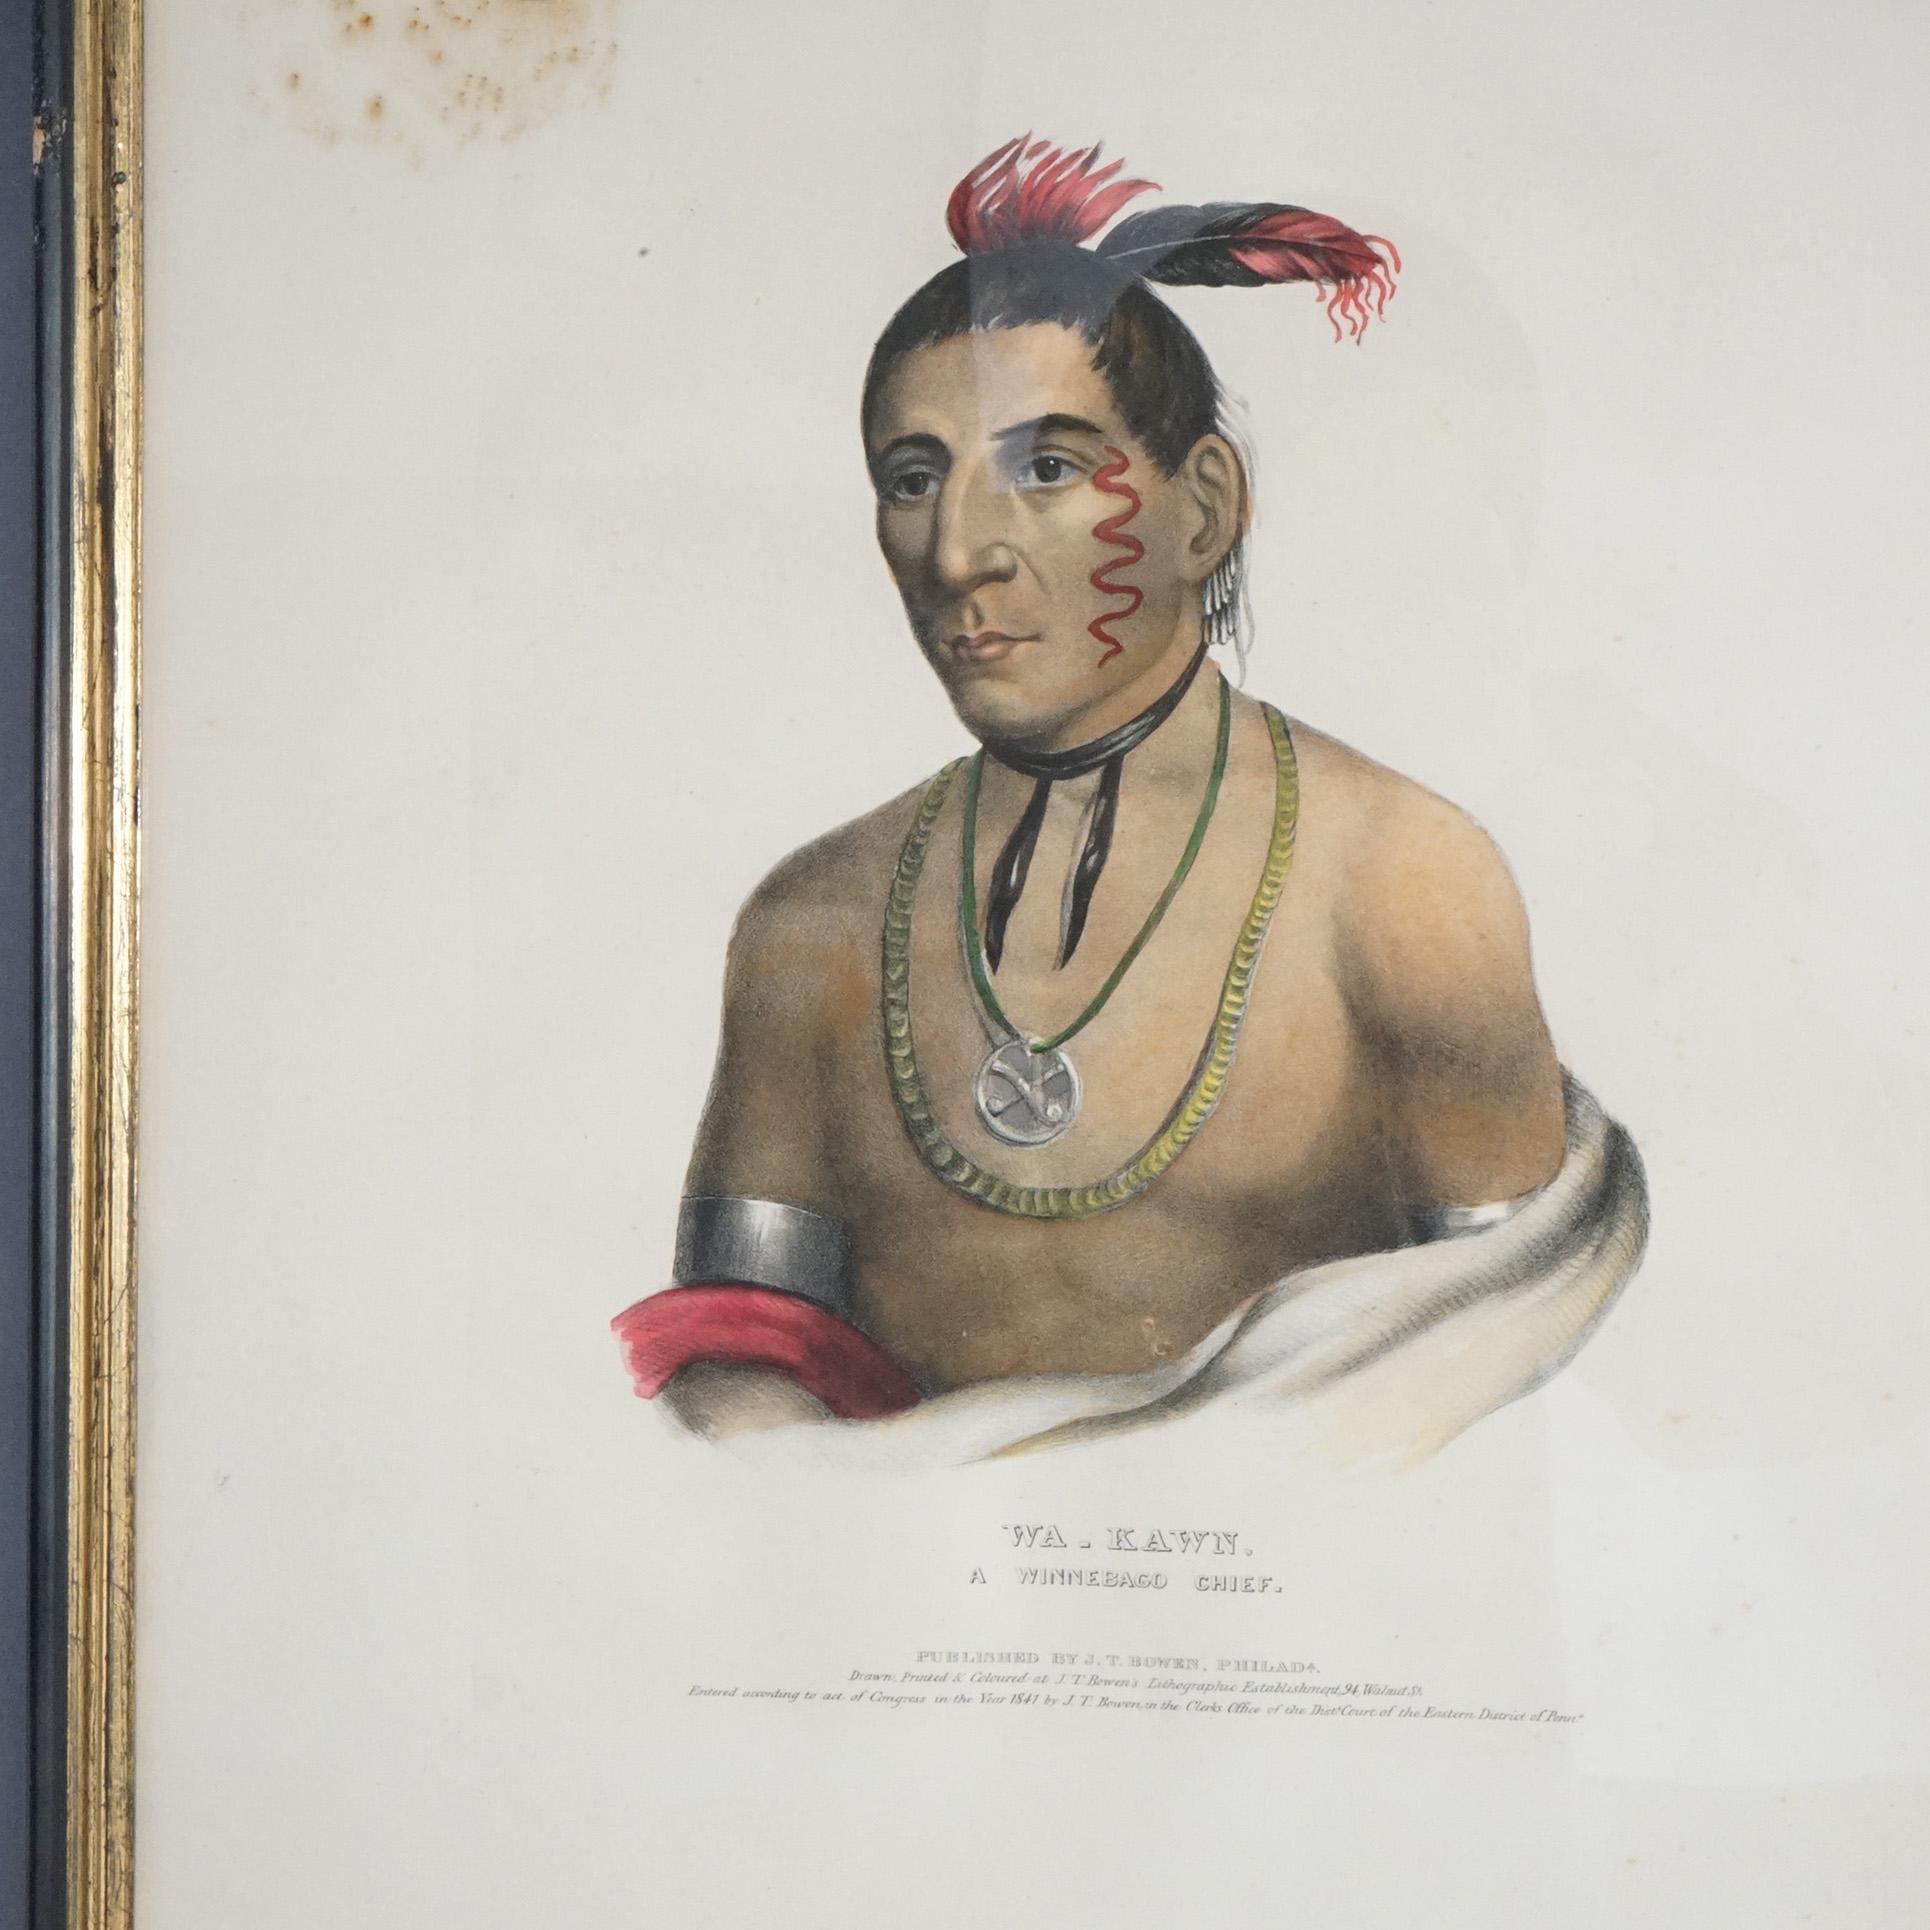 19th Century Antique American Indian Lithographs Published by J.T. Brown Philadelphia 19th C